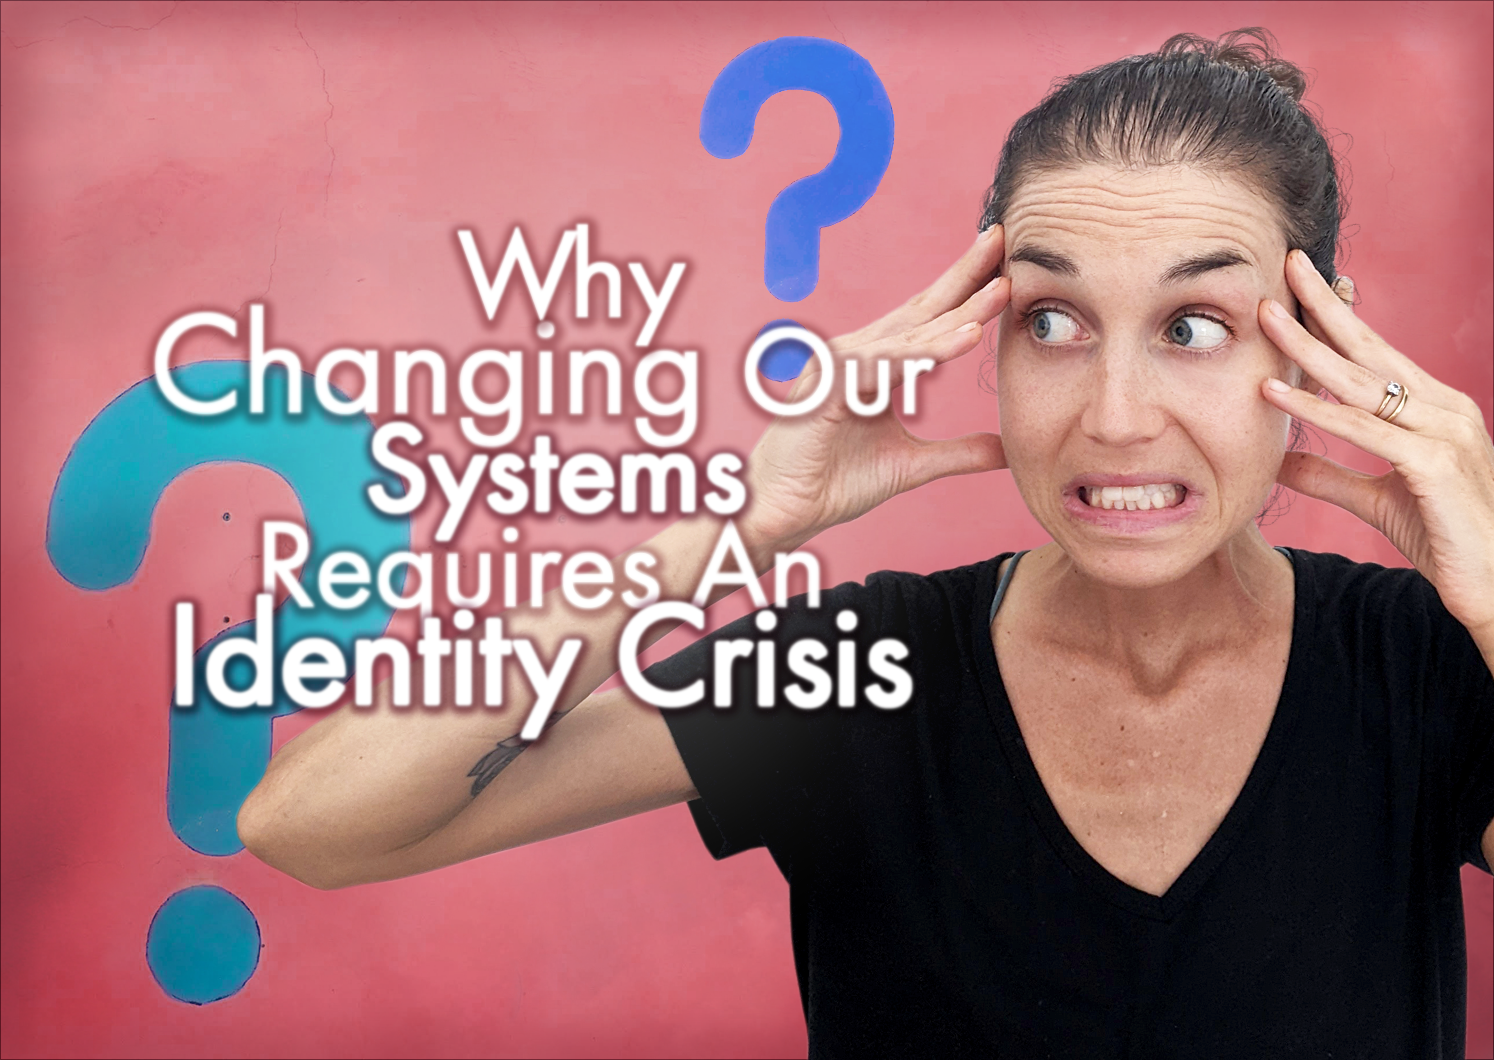 Why Changing Our Systems Requires An Identity Crisis